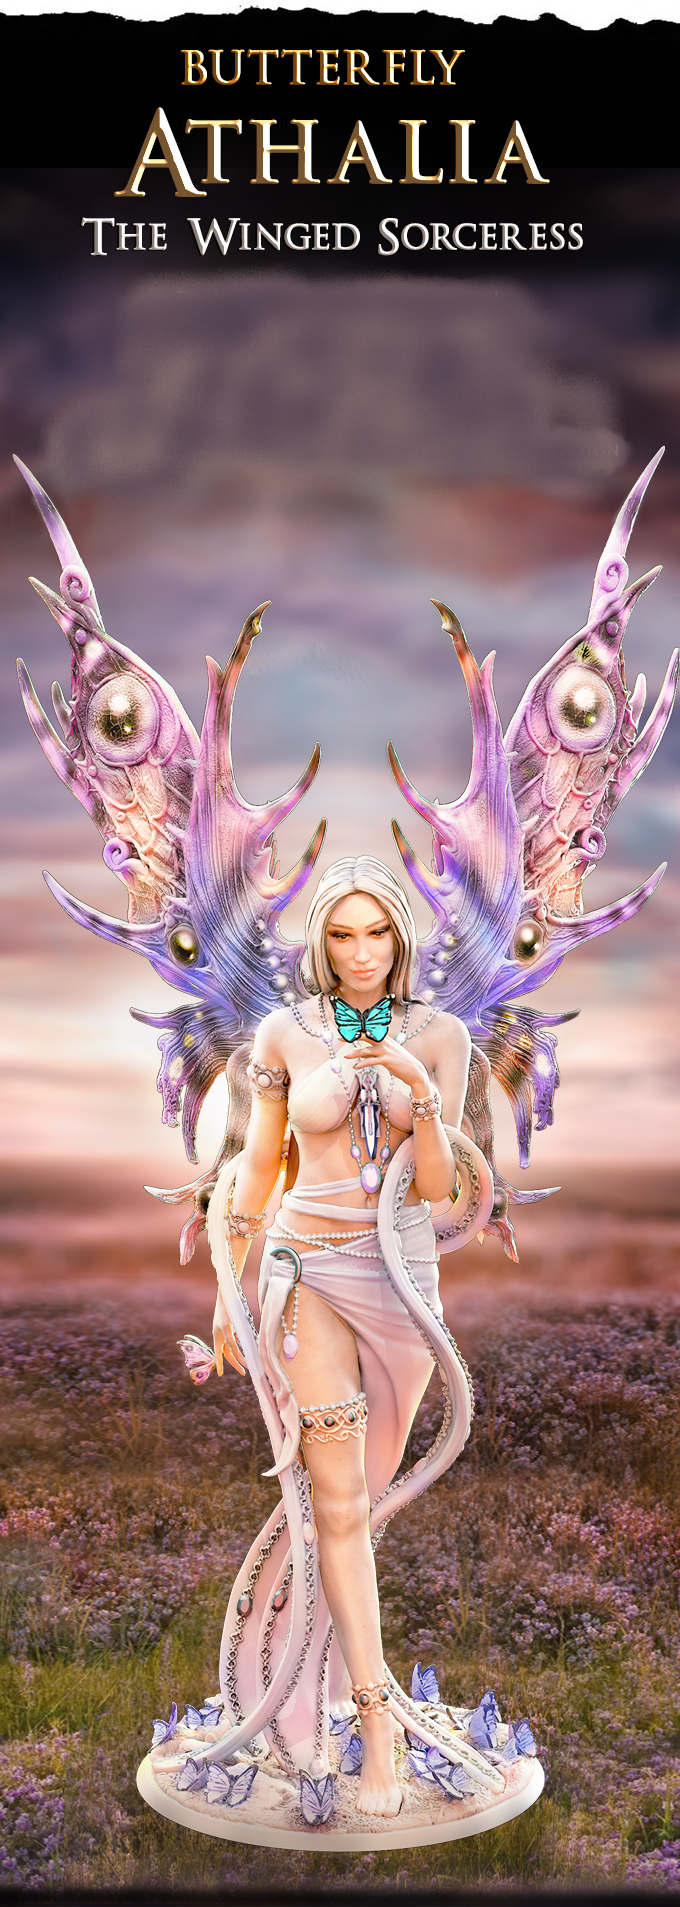 Butterfly: Athalia The Winged Sorceress